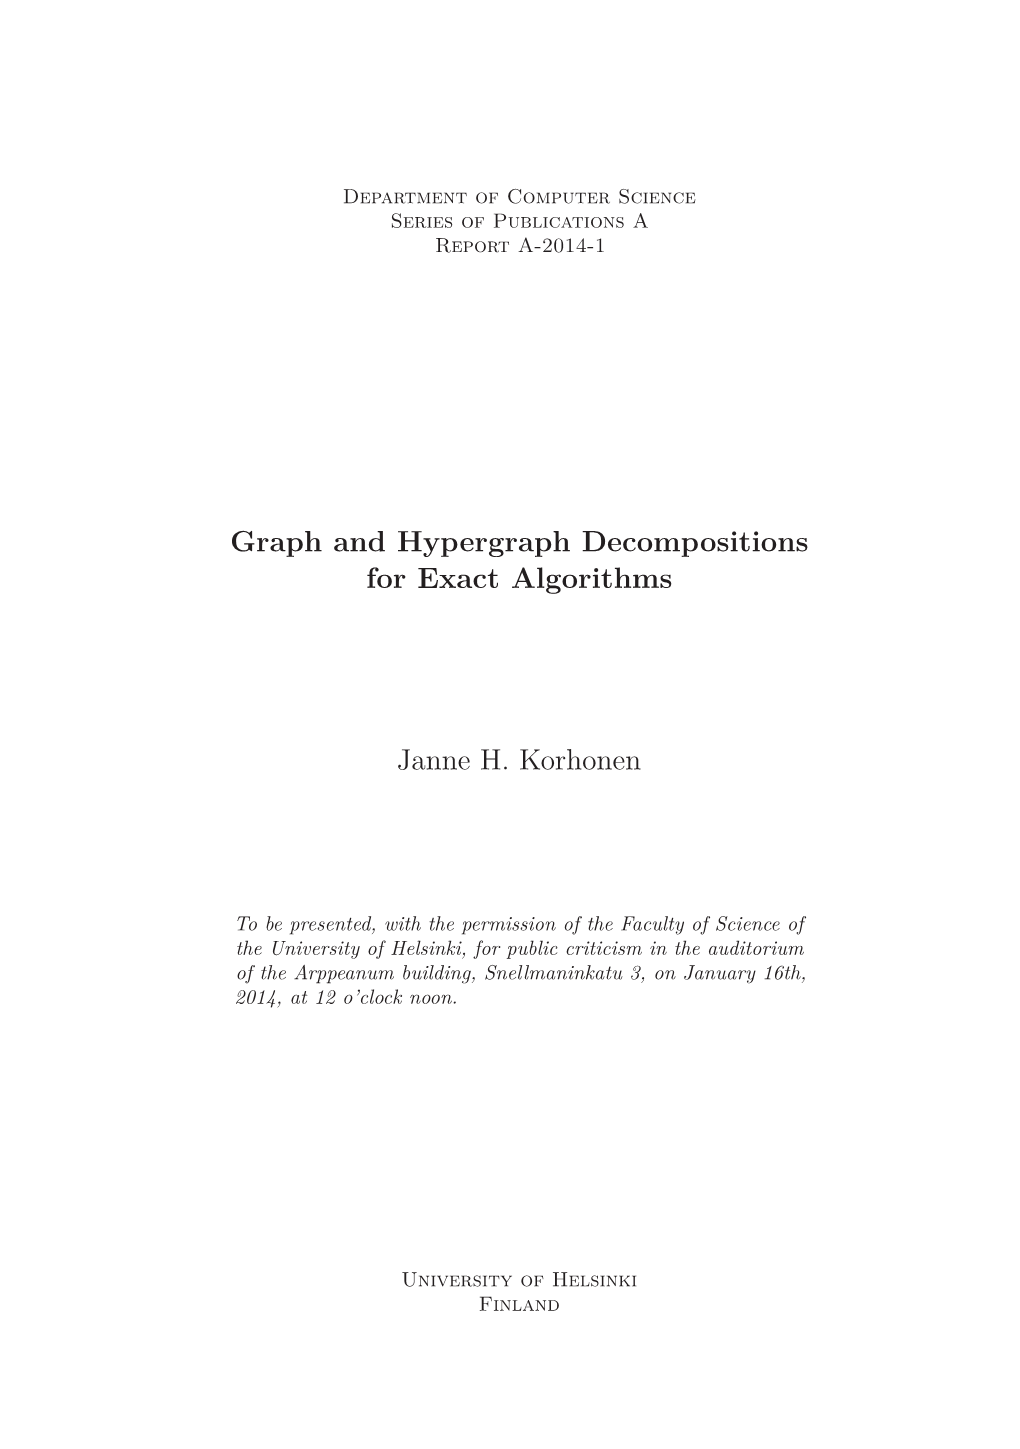 Graph and Hypergraph Decompositions for Exact Algorithms